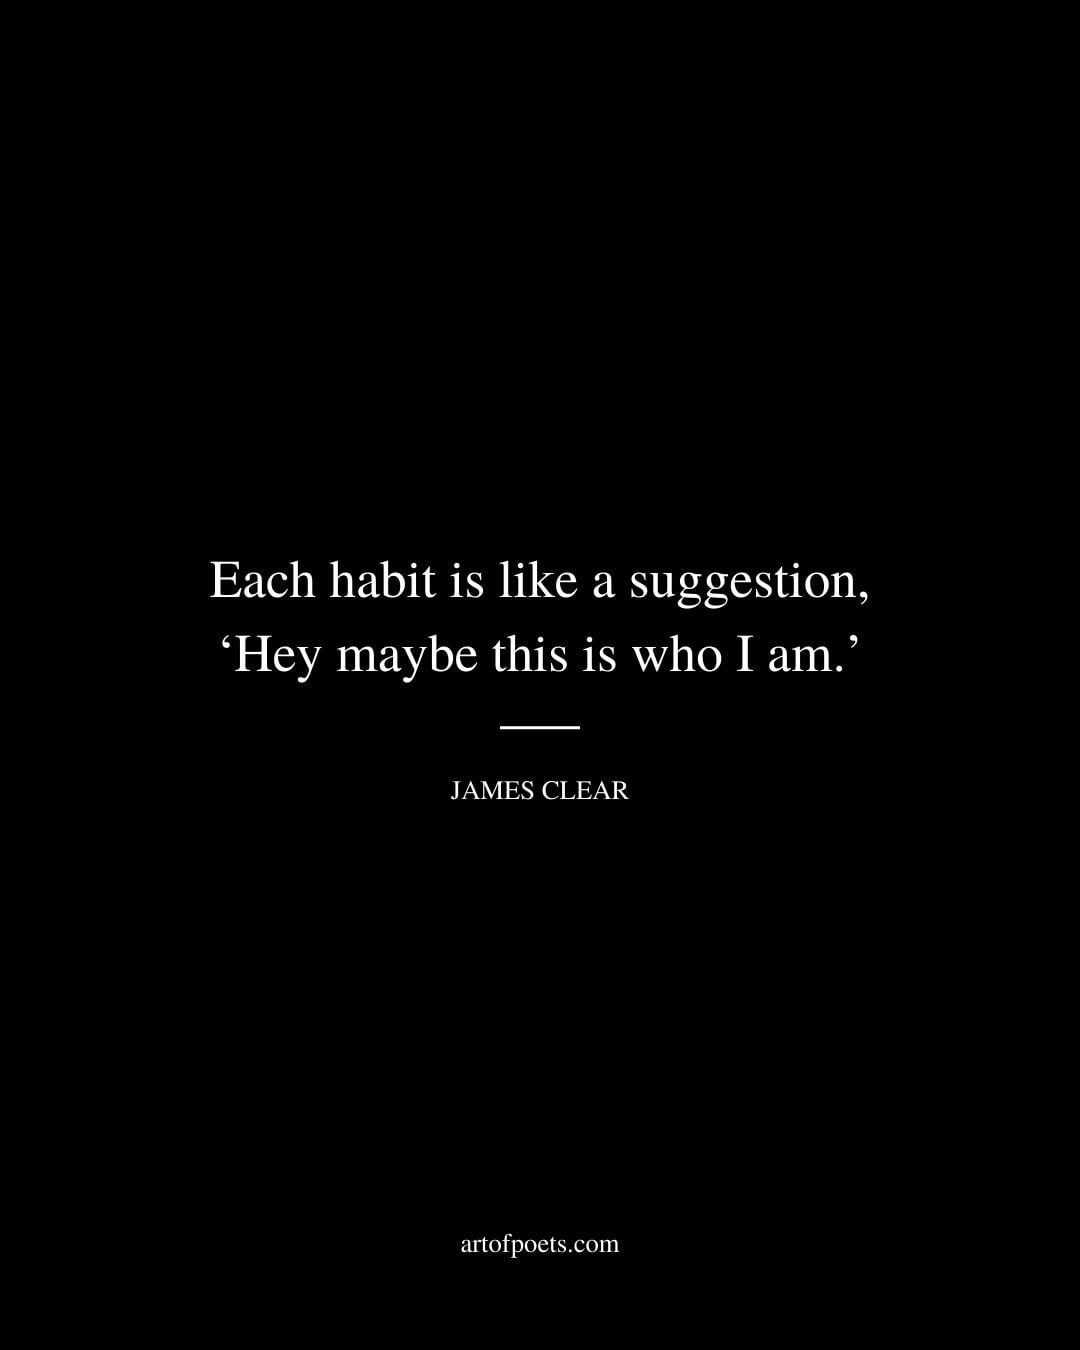 Each habit is like a suggestion ‘Hey maybe this is who I am